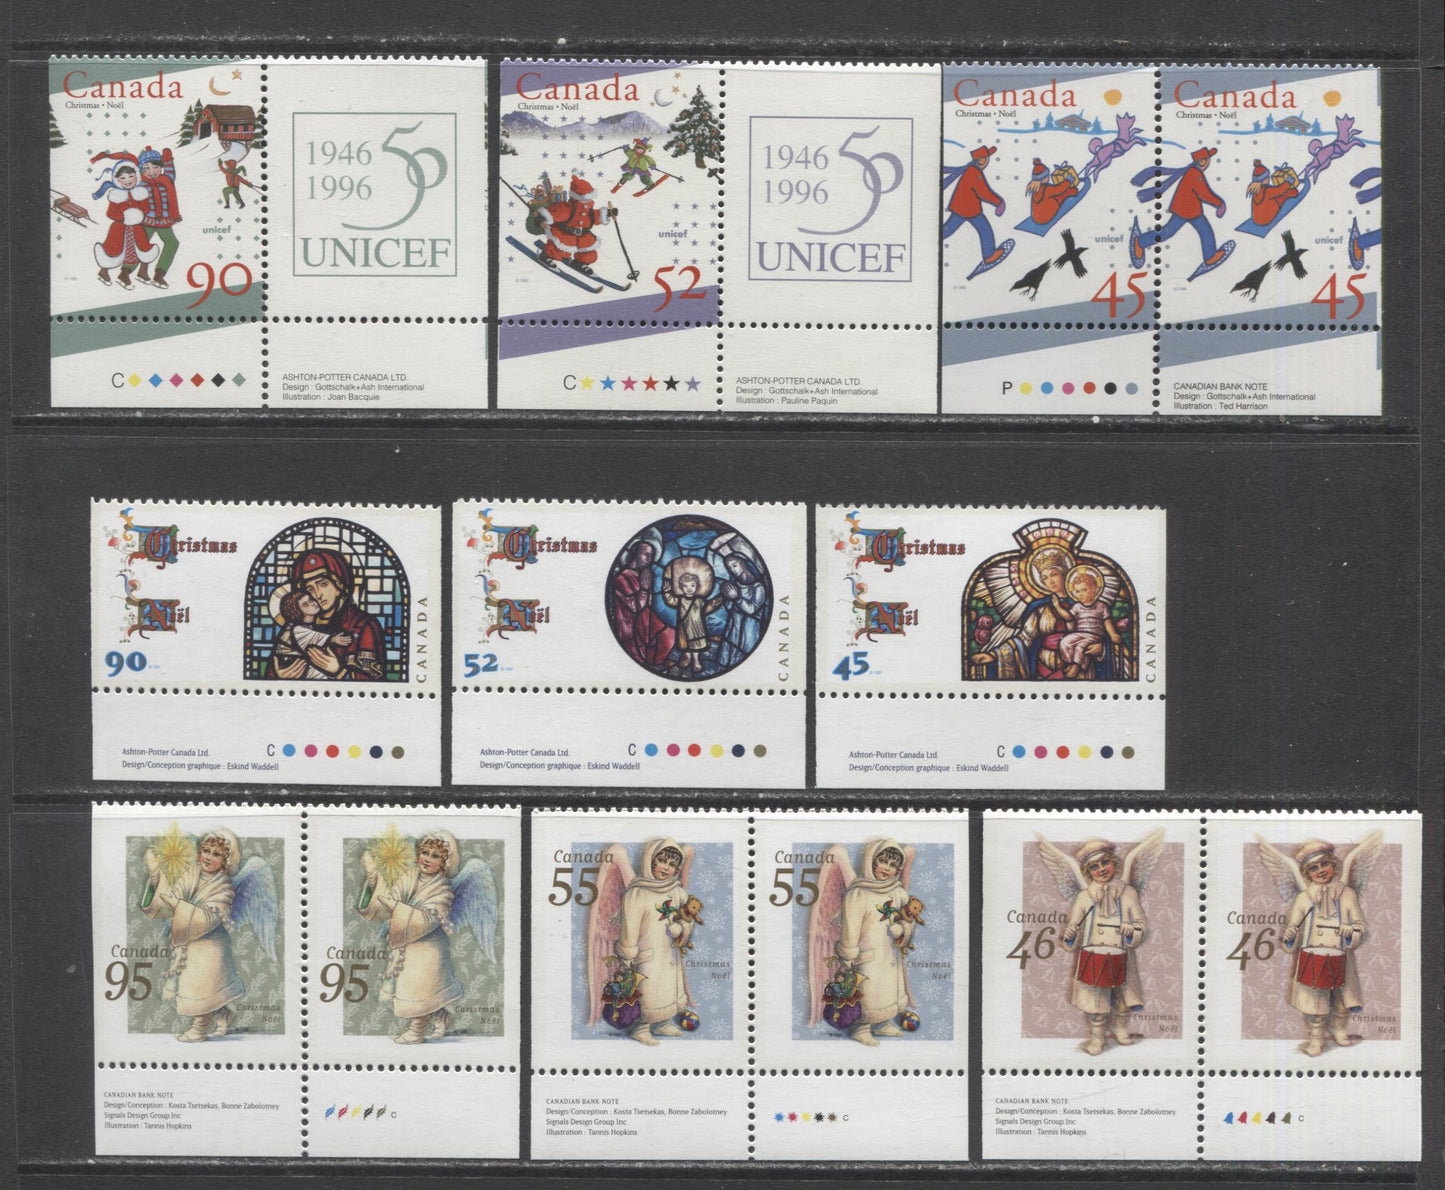 Lot 411 Canada #1627as-1629as, 1669as-1671as, 1815as-1817as 45c/95c Multicolored Delivering Gifts By Sled/Angel With Candle, 1996-1997, 1999 Christmas, 9 VFNH Booklet Singles & Pairs, All With Printer's Inscription